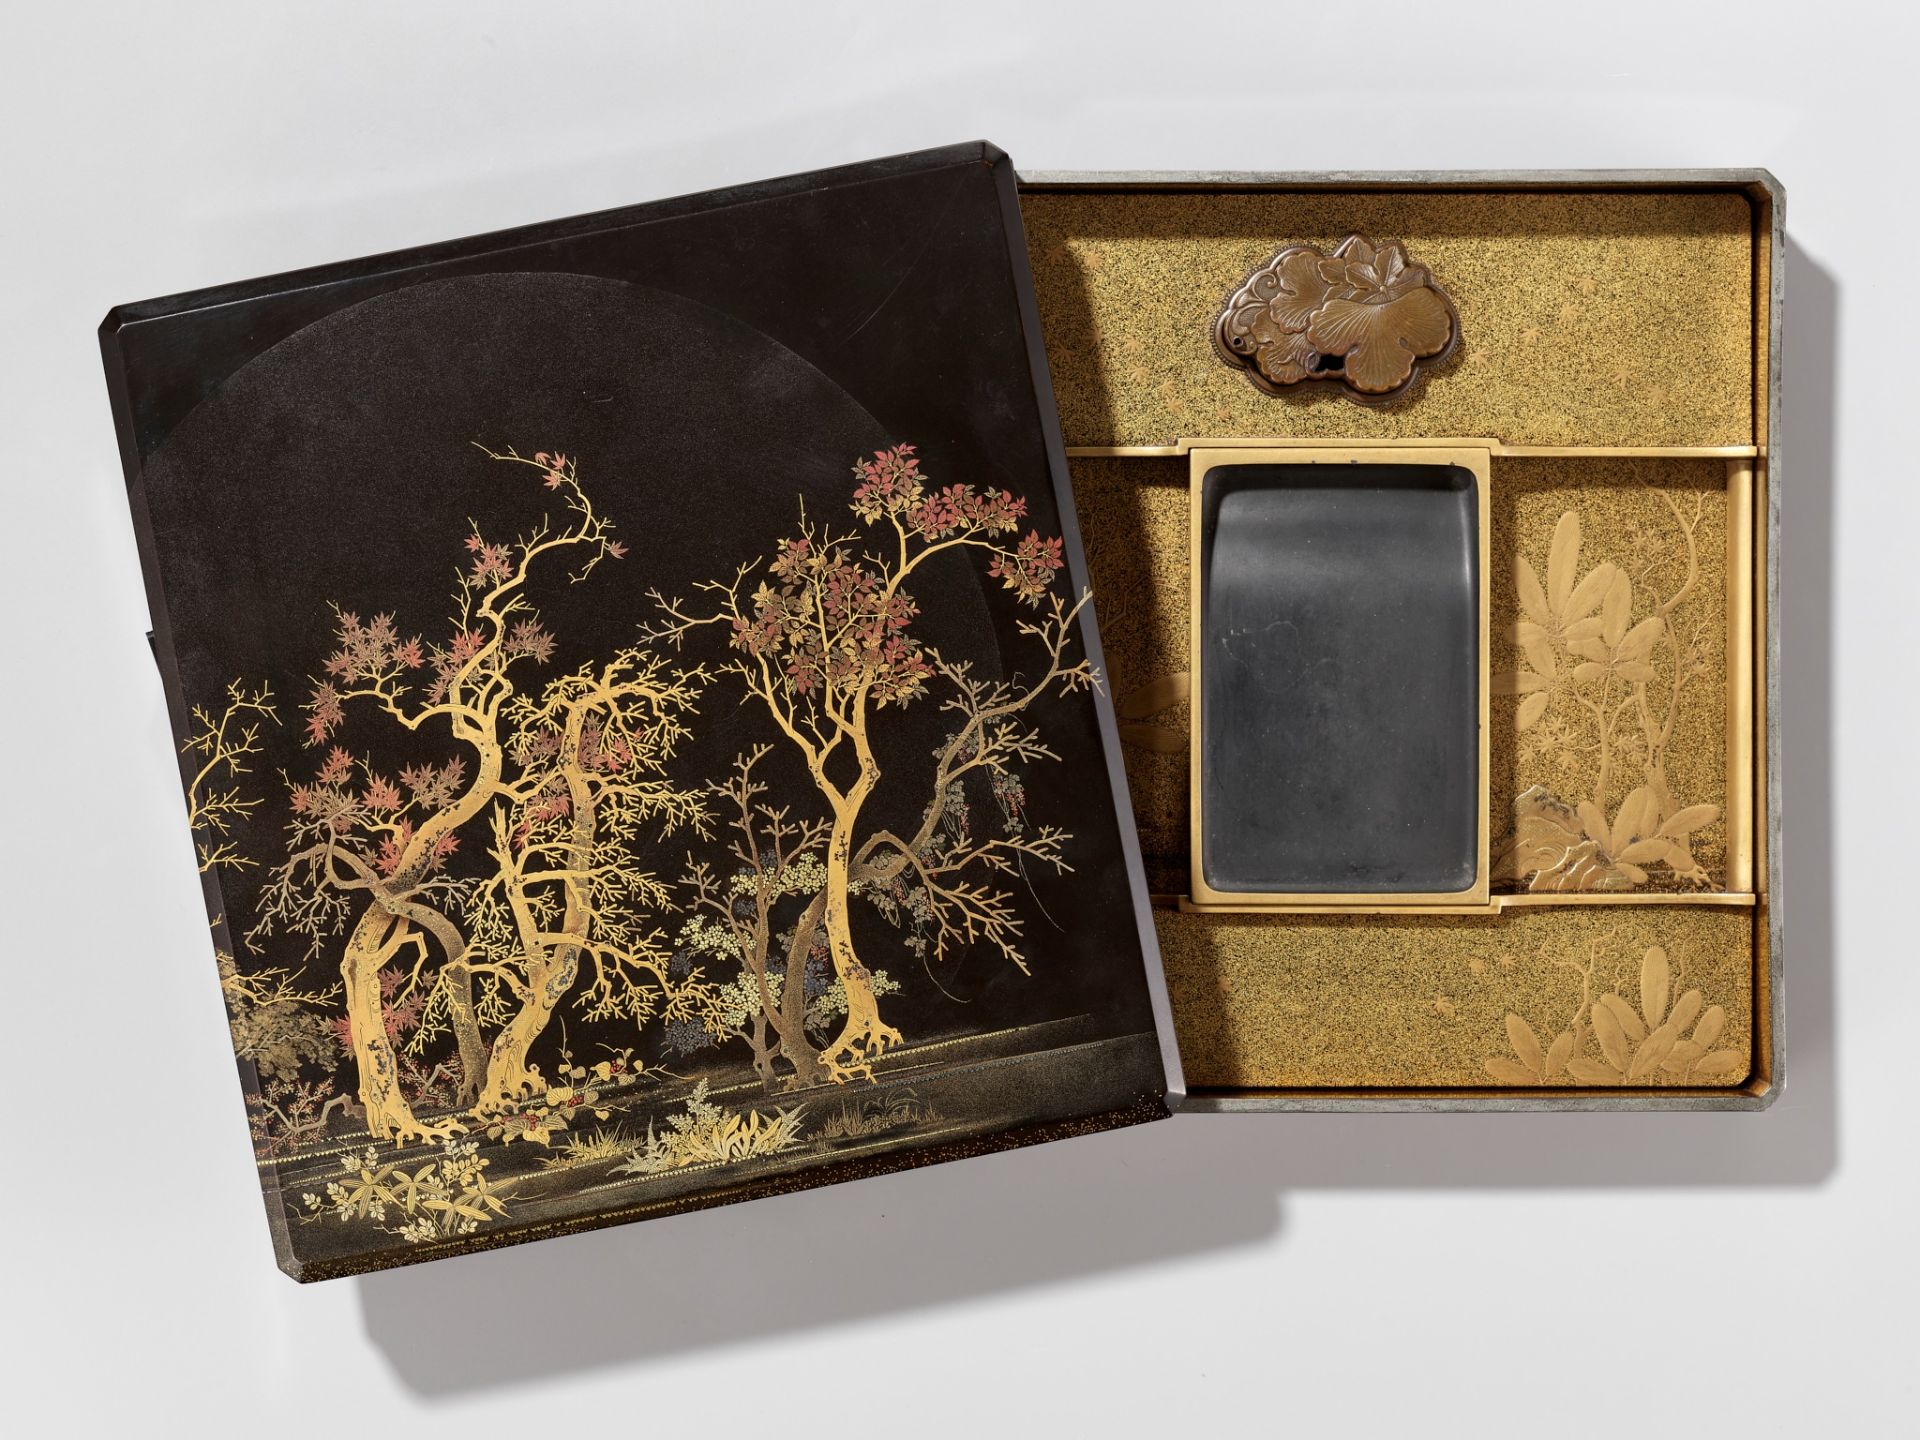 A SUPERB LACQUER SUZURIBAKO (WRITING BOX) DEPICTING A MOONLIT FOREST